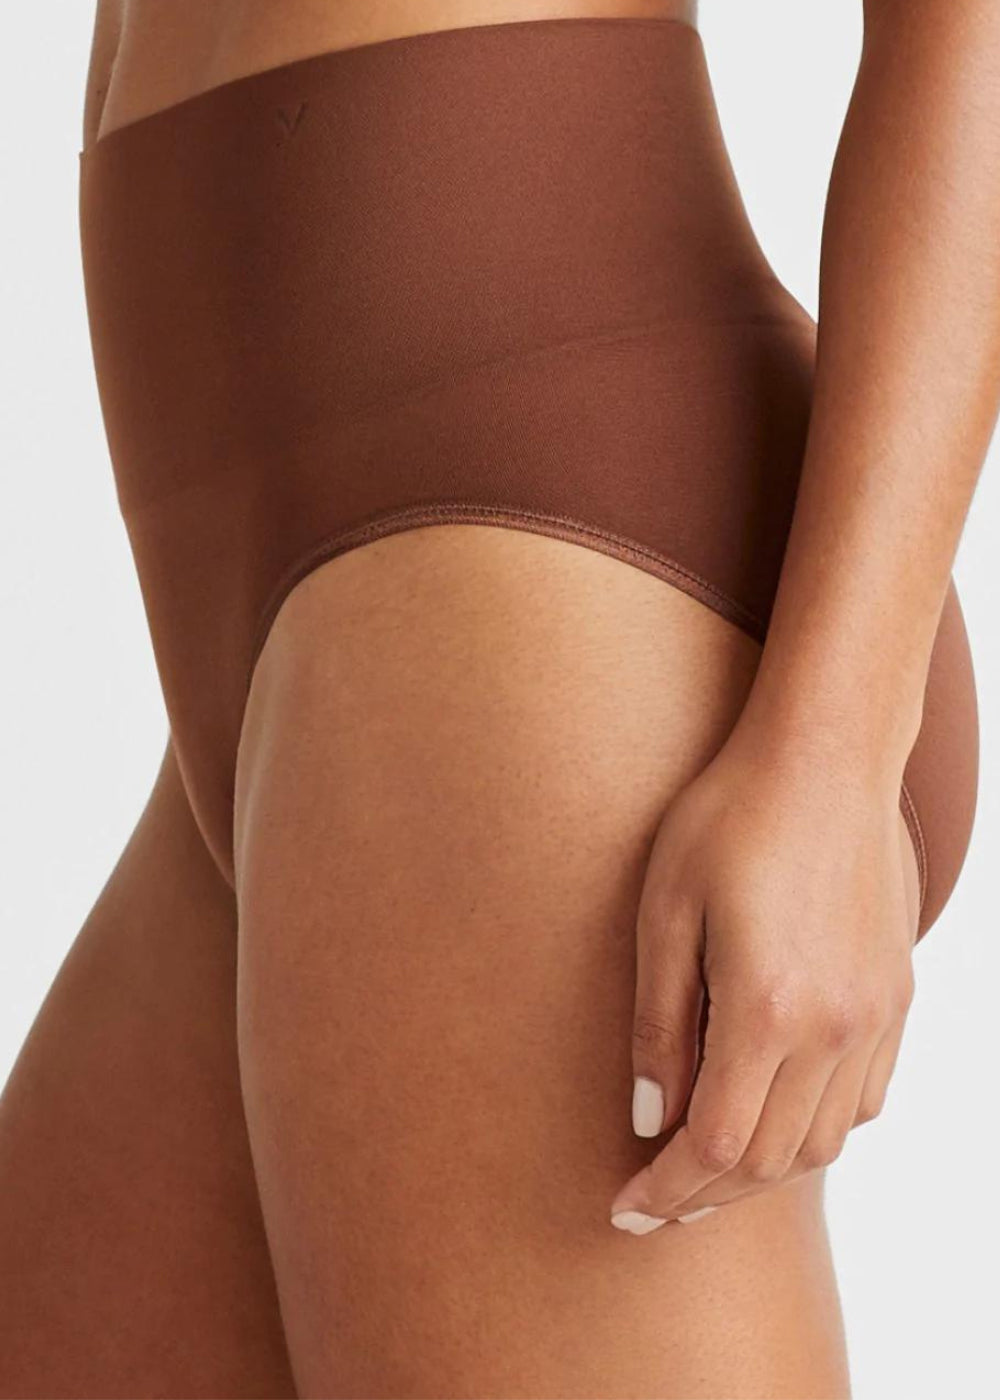 Ultralight Shaping Brief - Seamless from Yummie in Copper Glow  - 1